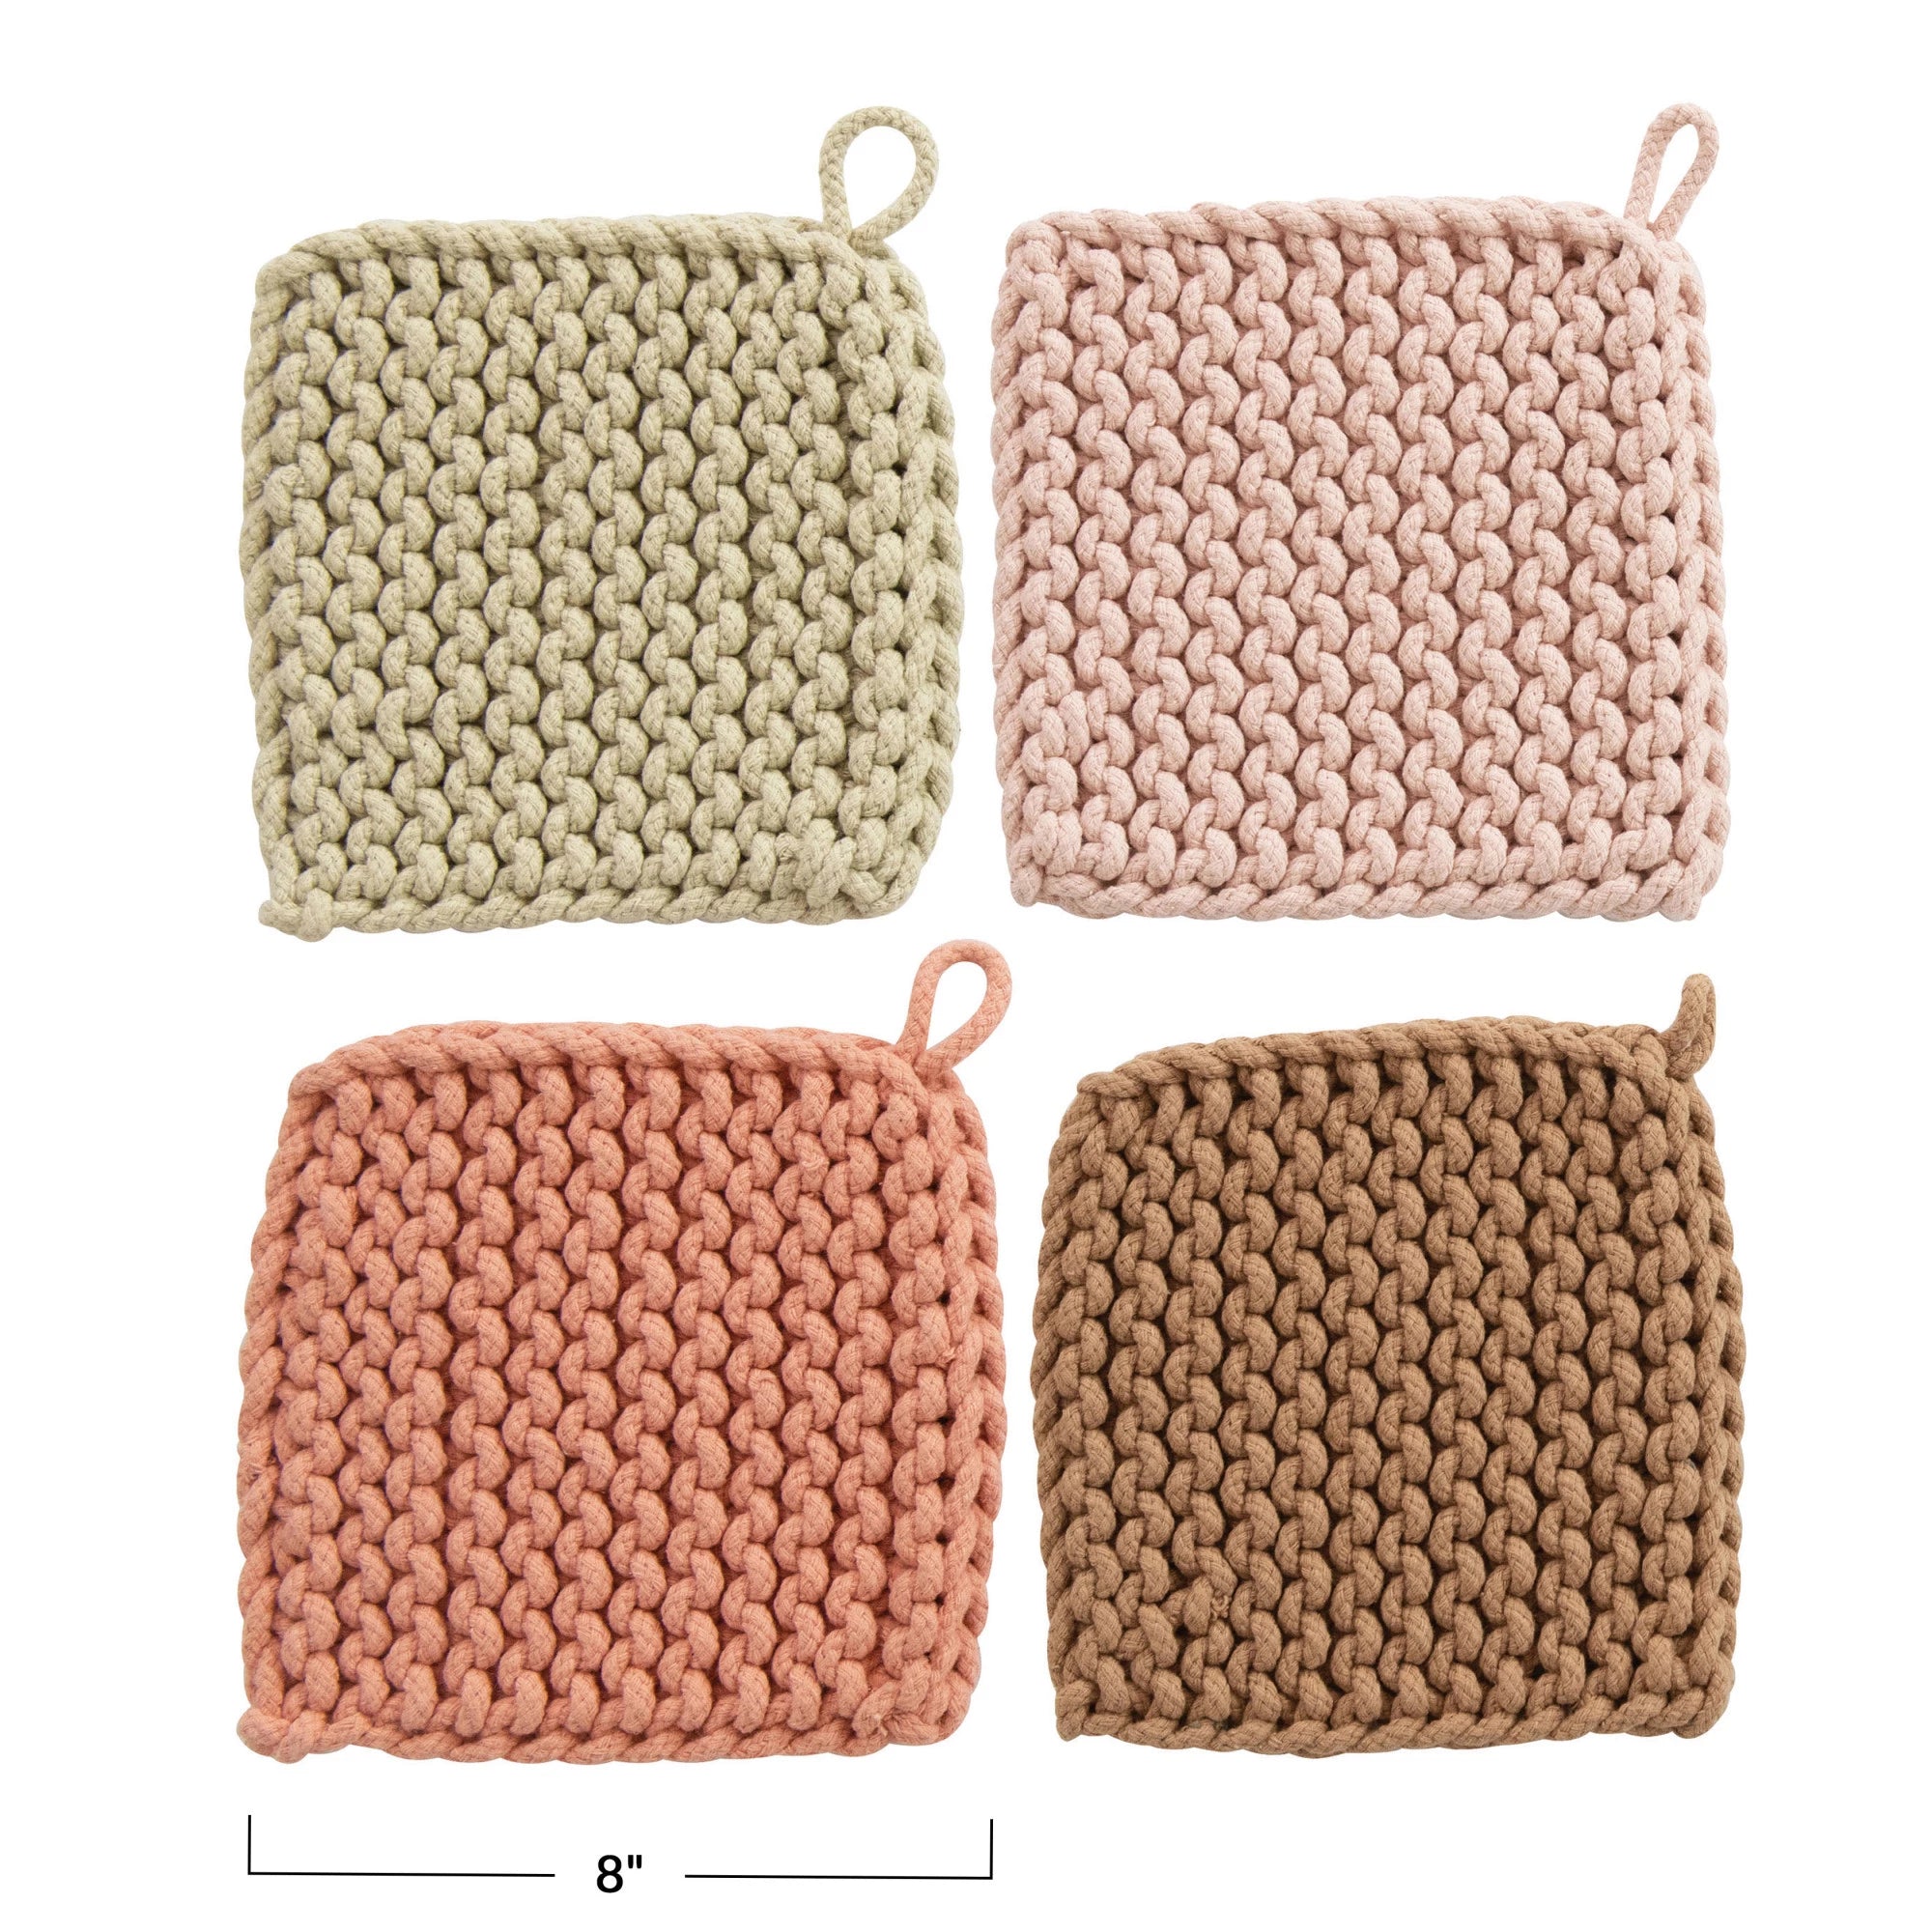 8" Crocheted Pot Holder Heritage Colors